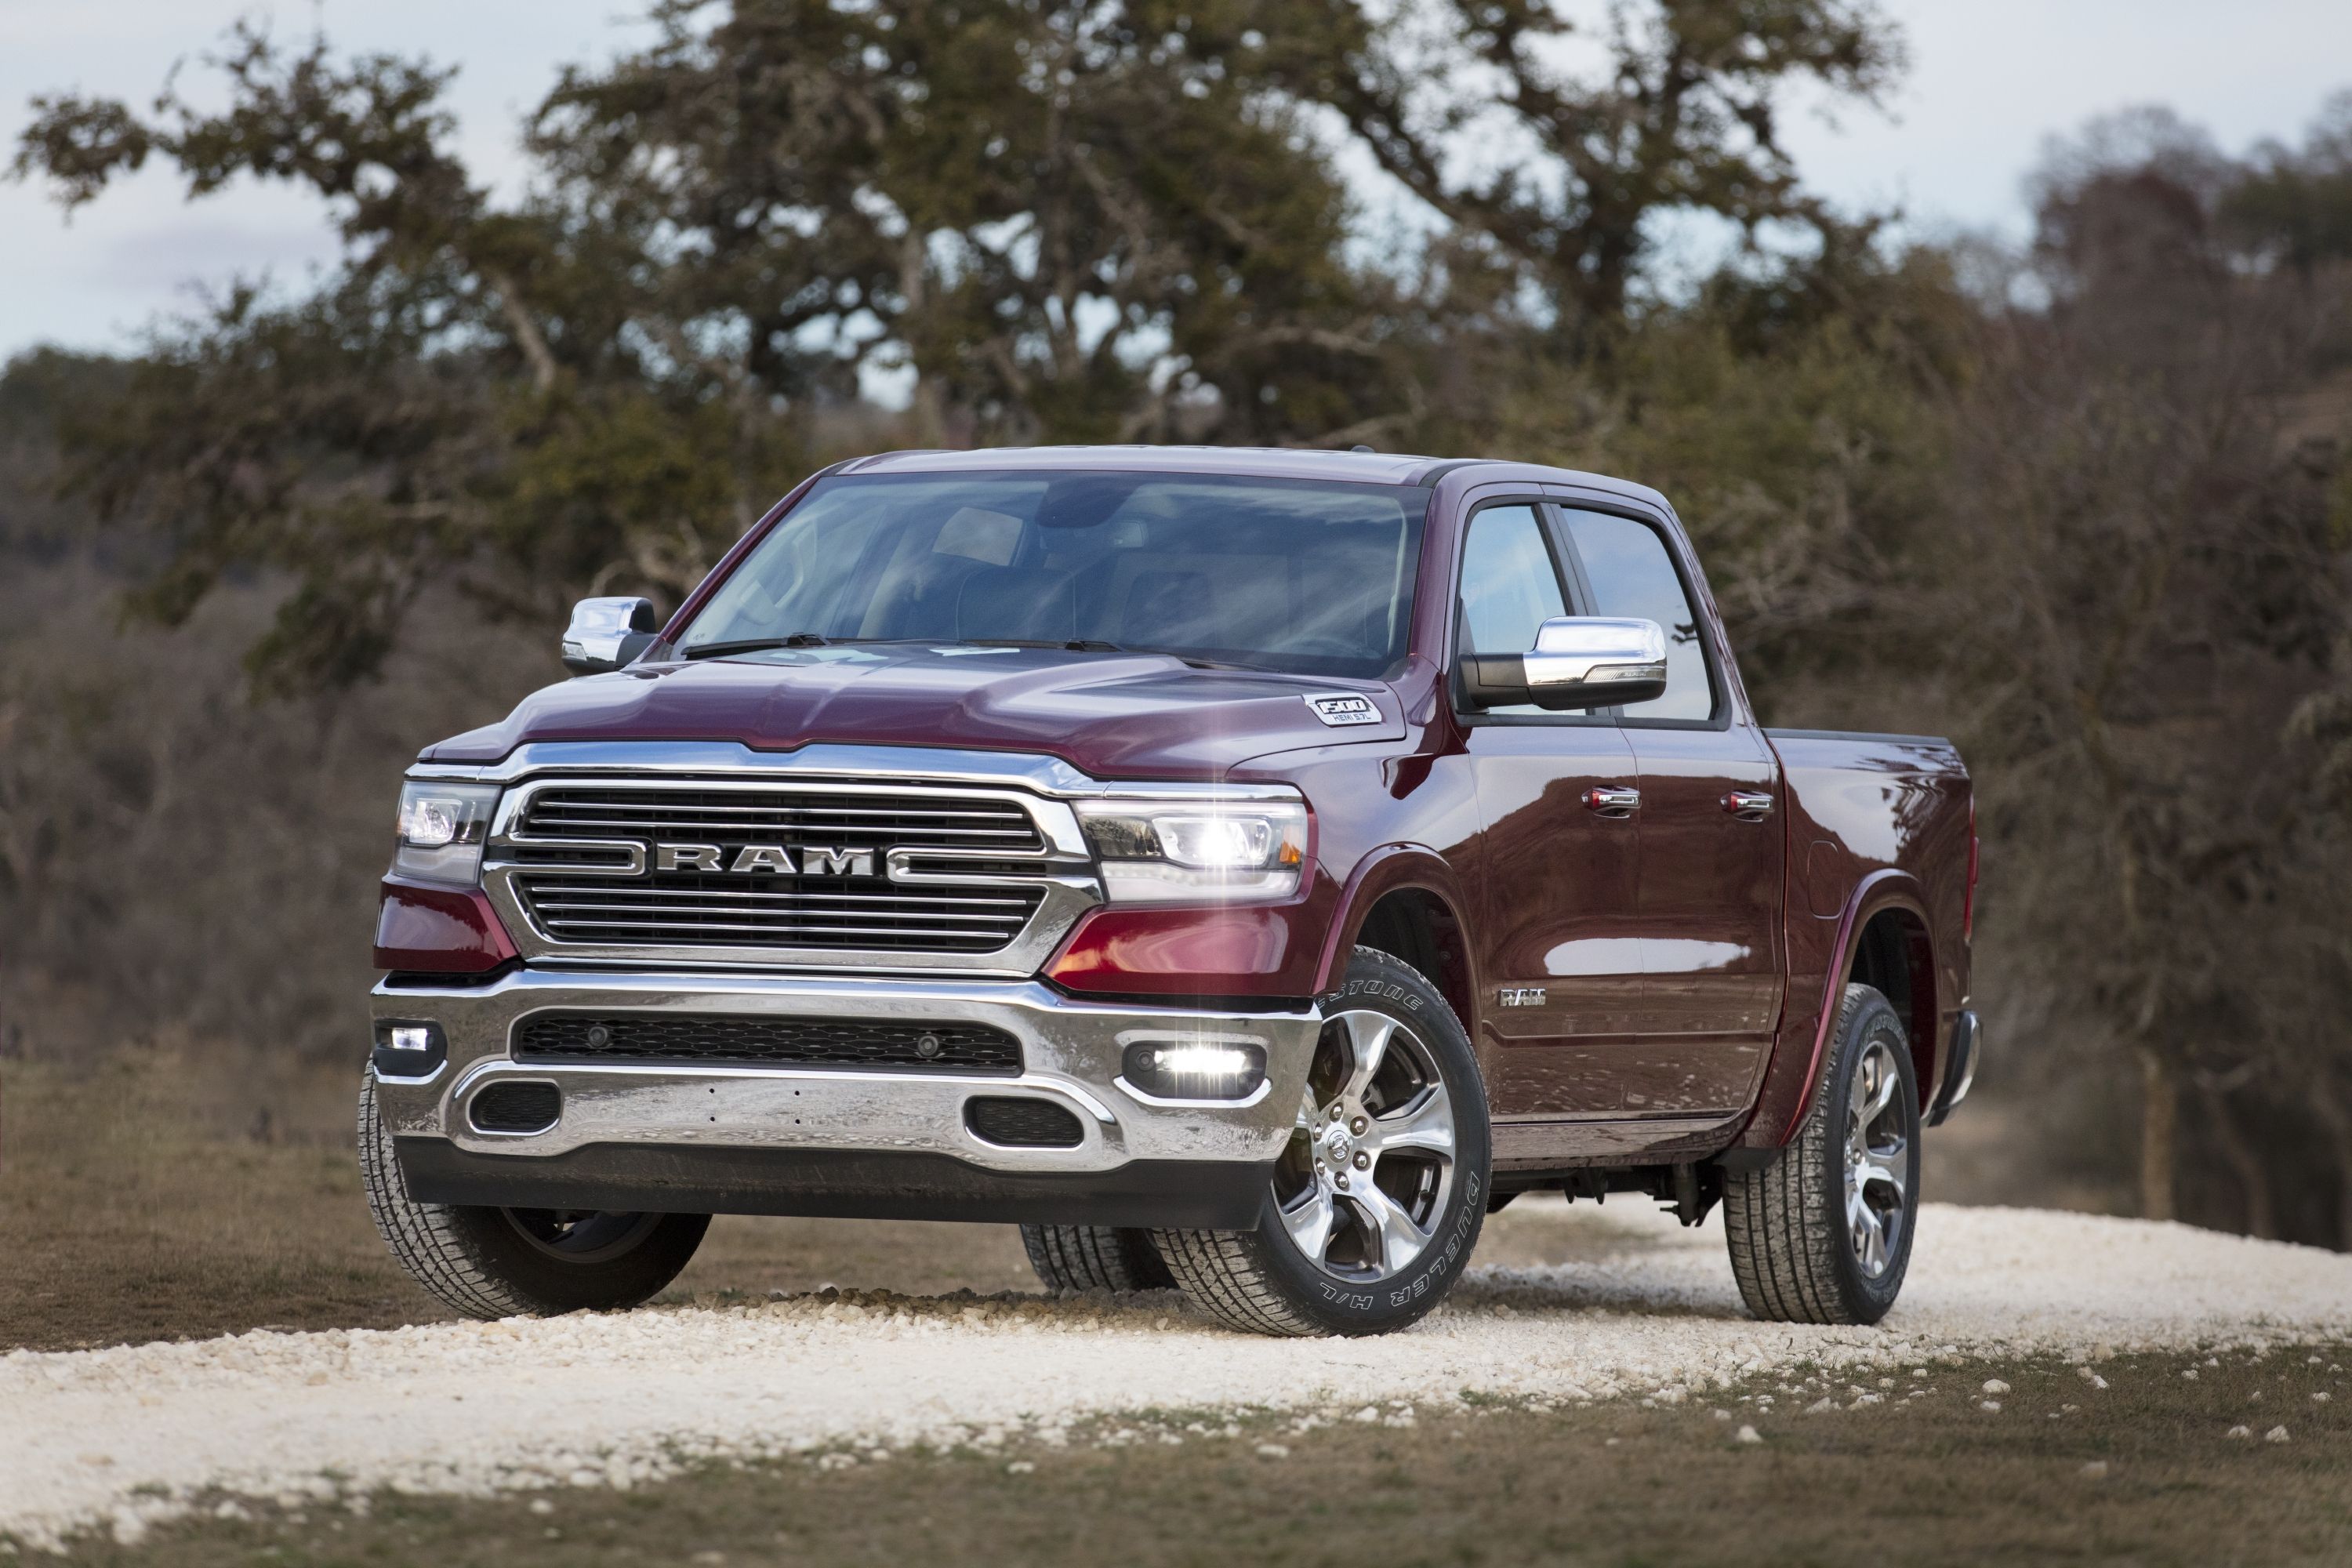 Ram 1500 is a Toolbox Missing Just One